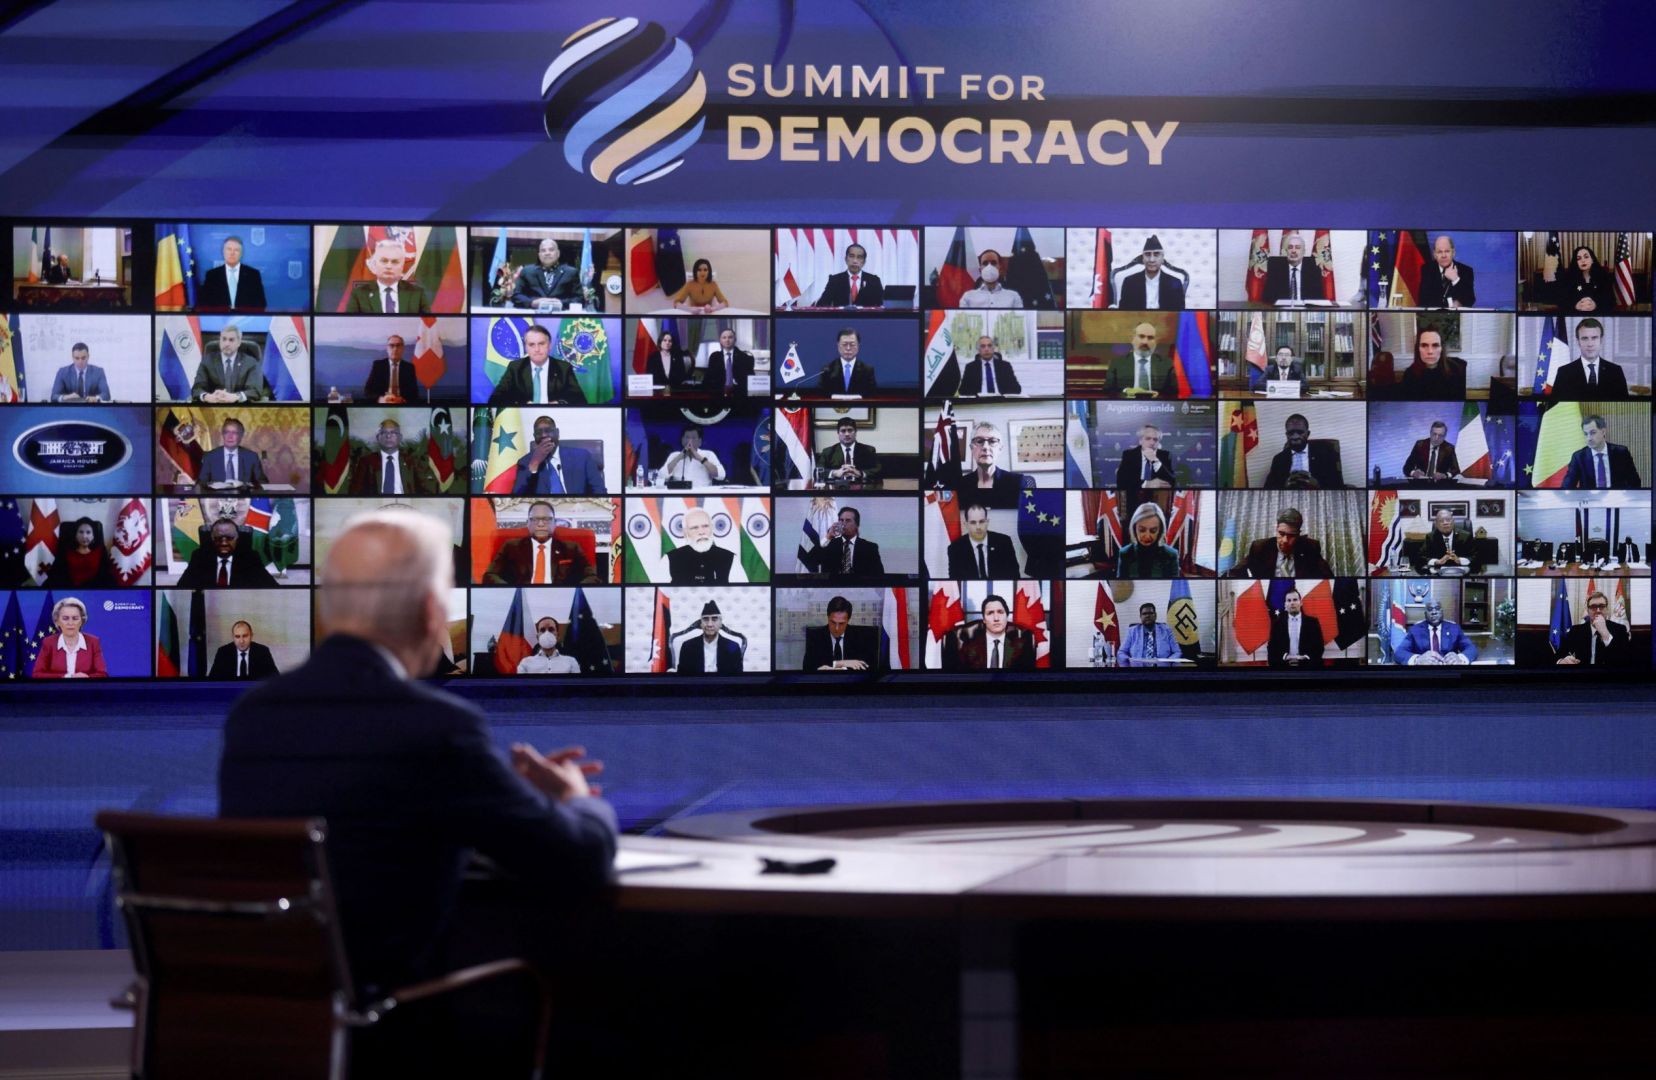 Pundits lambast discriminatory US foreign policy vis-à-vis invitees to March 29 Democracy Summit